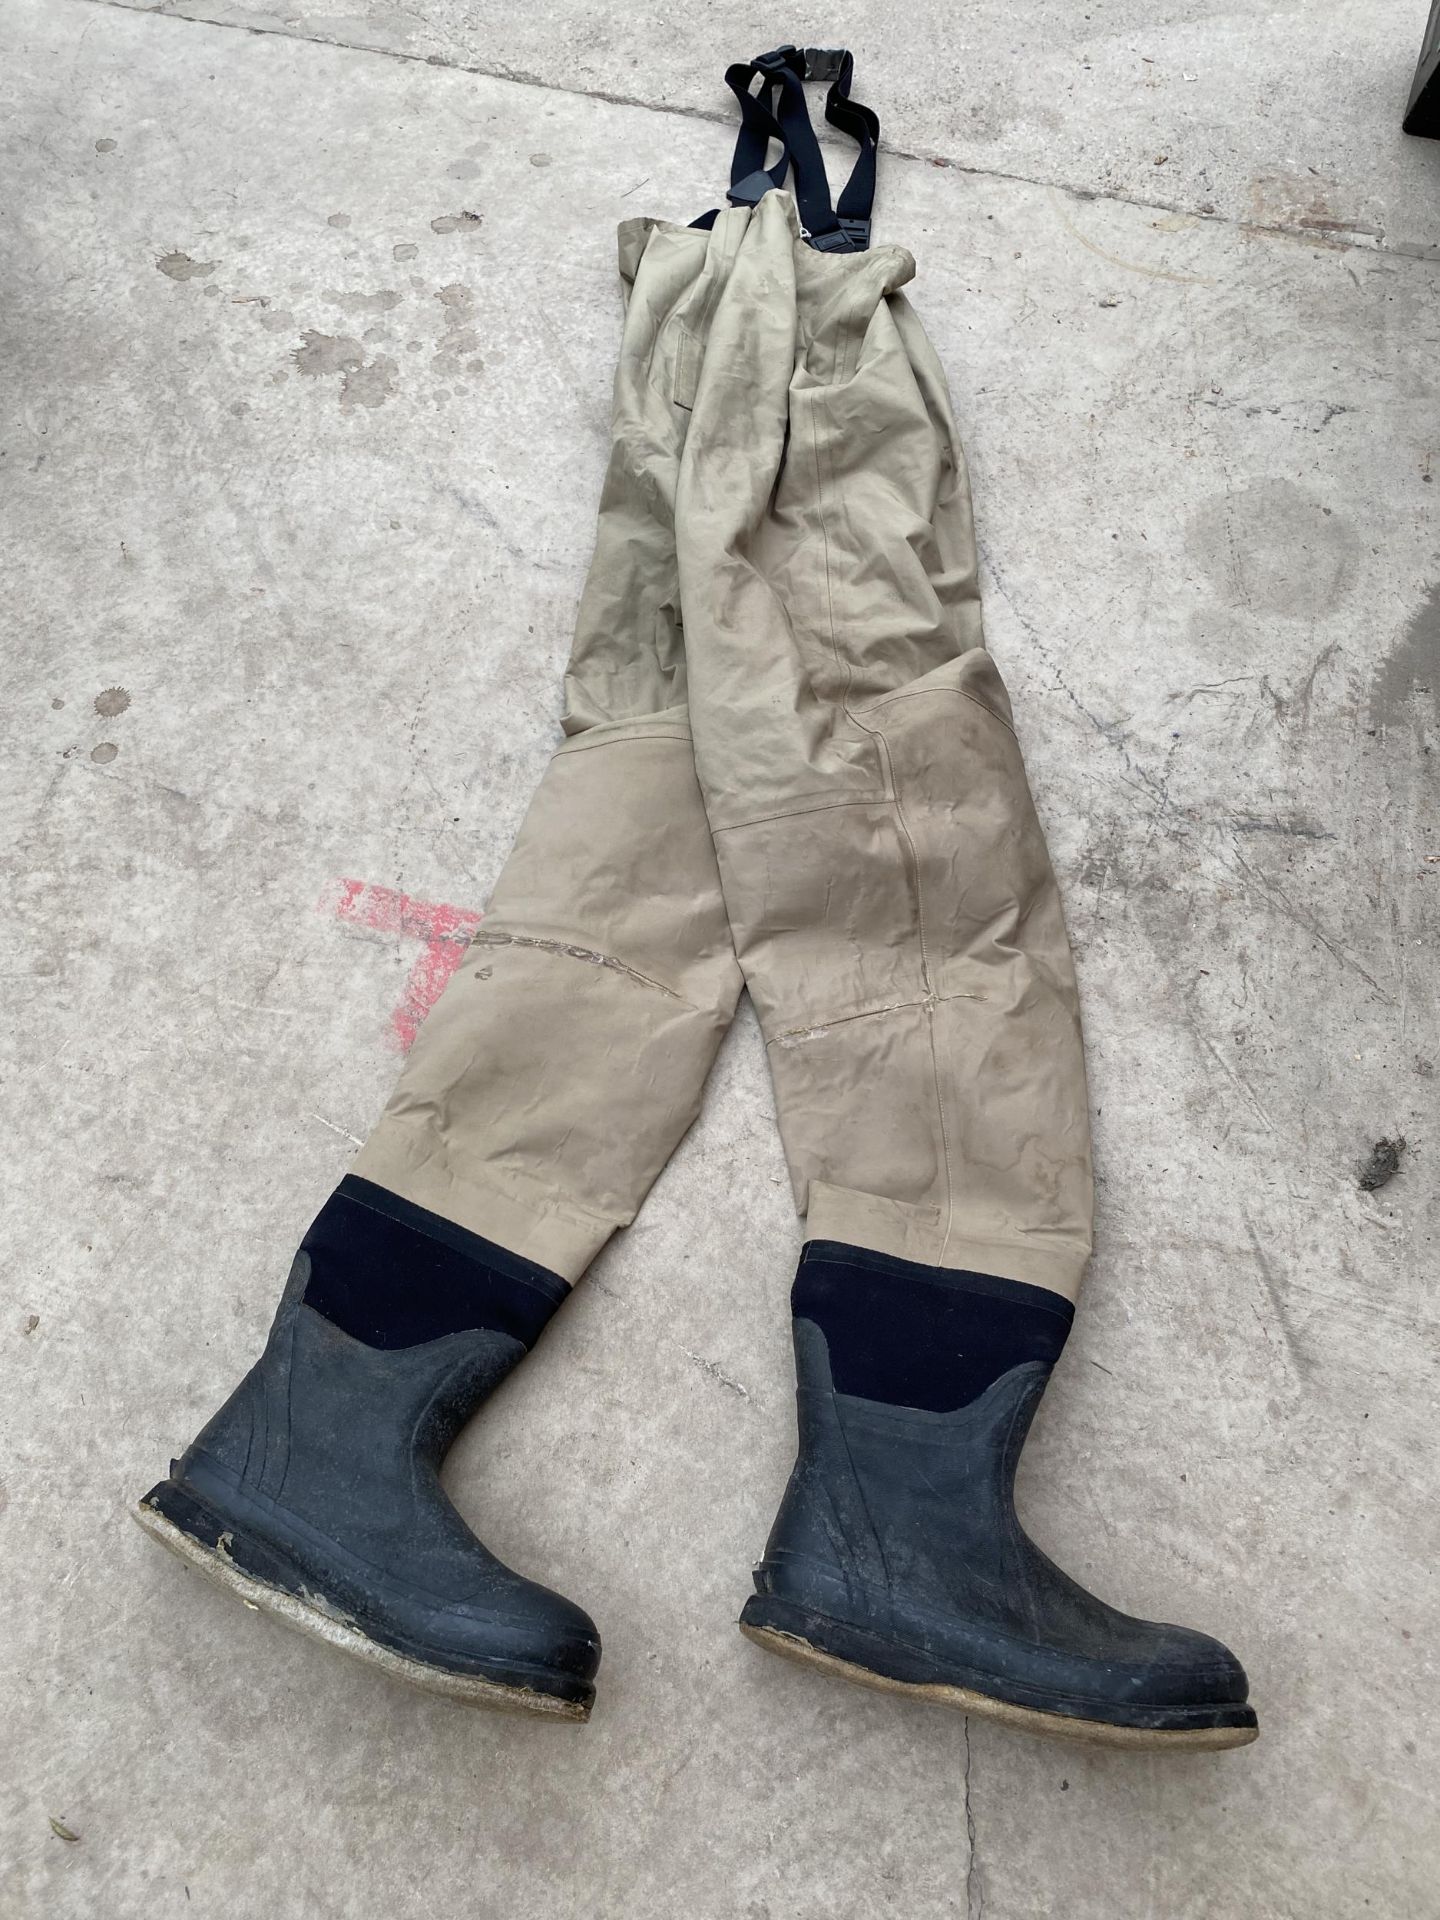 A PAIR OF SIZE 11 CHEST WADERS